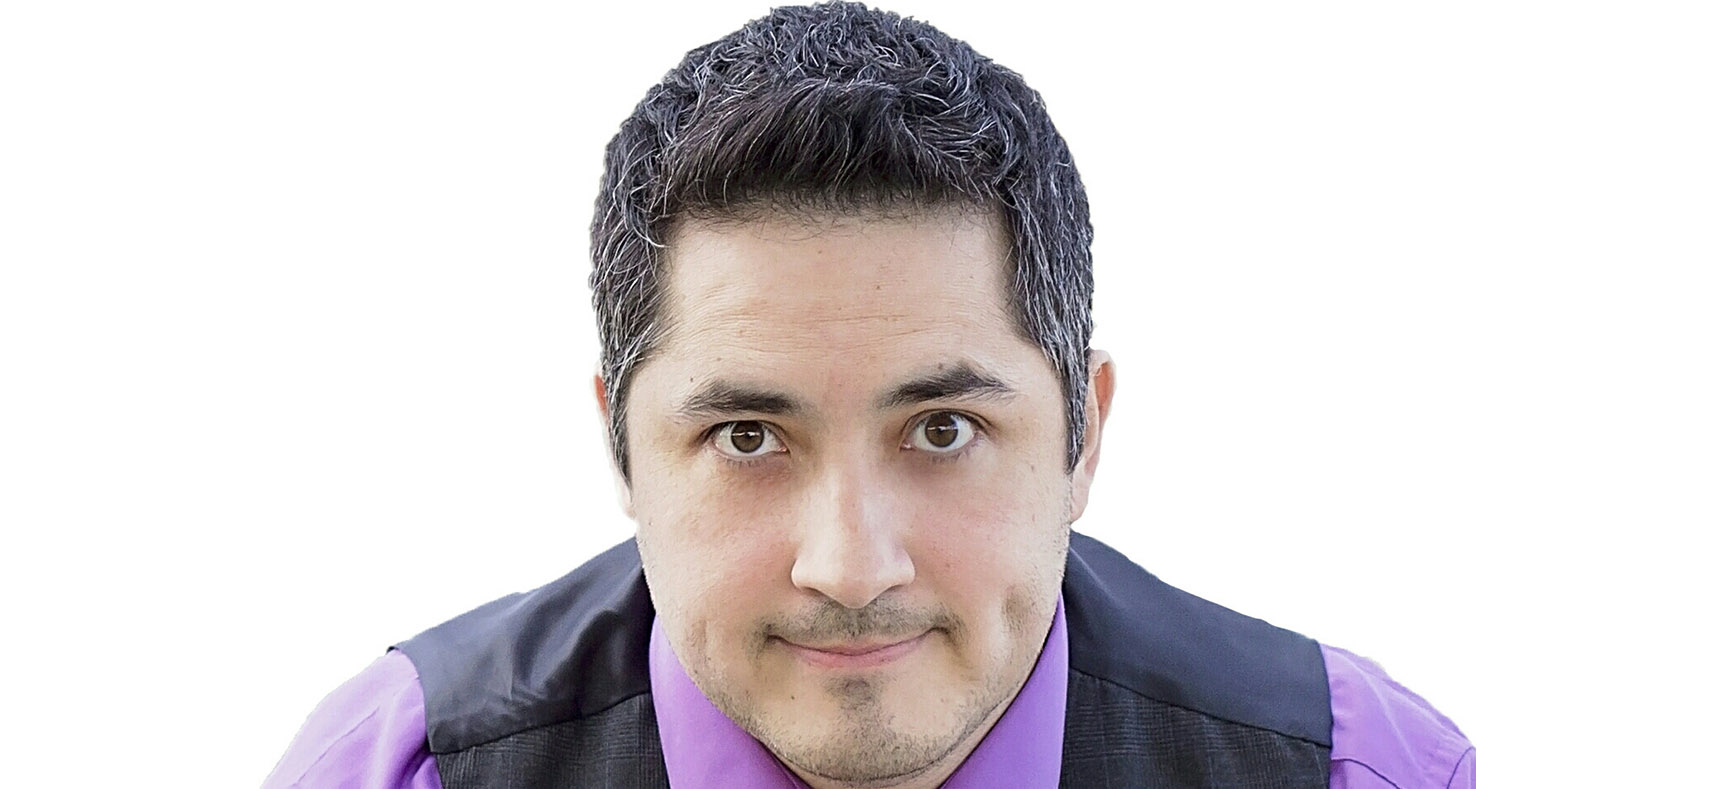 This Saturday night at Comedy Heights at Lestat’s we bring you the hilarious Ace Guillen.